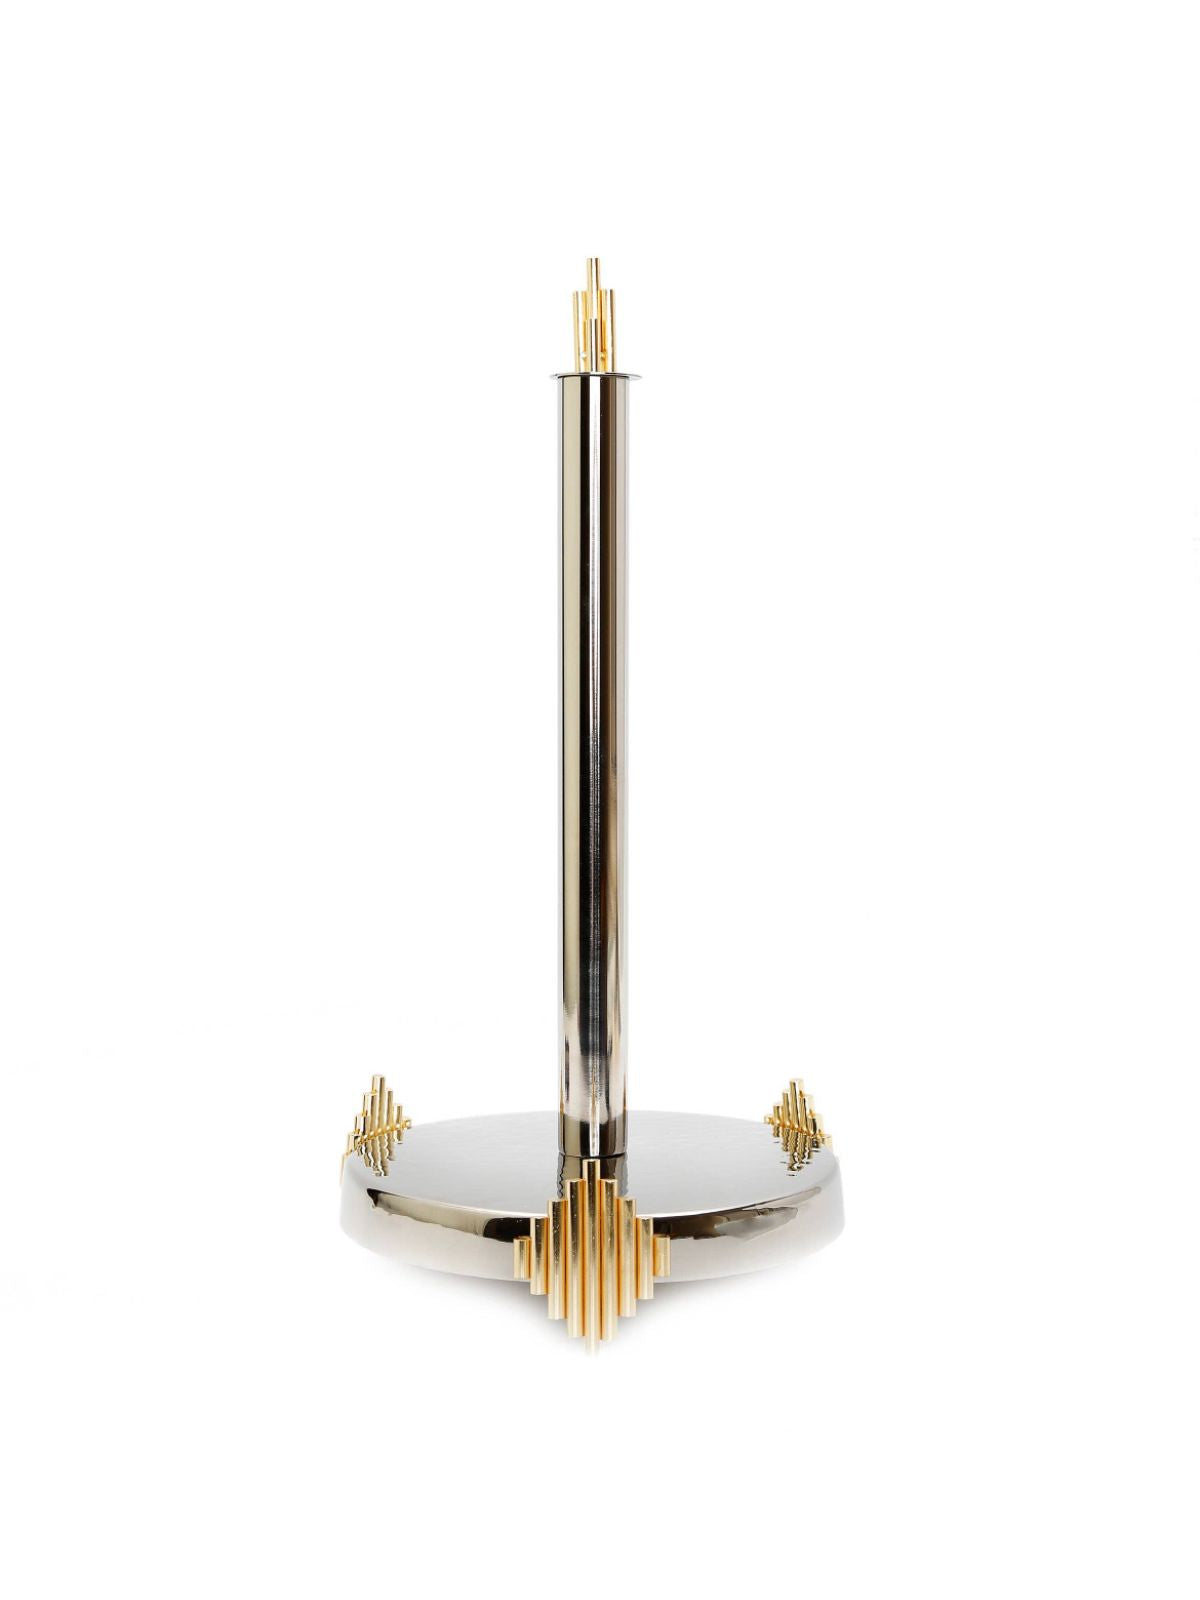 Stainless Steel Luxury Paper Towel Holder with Gold Diamond Design - KYA Home Decor